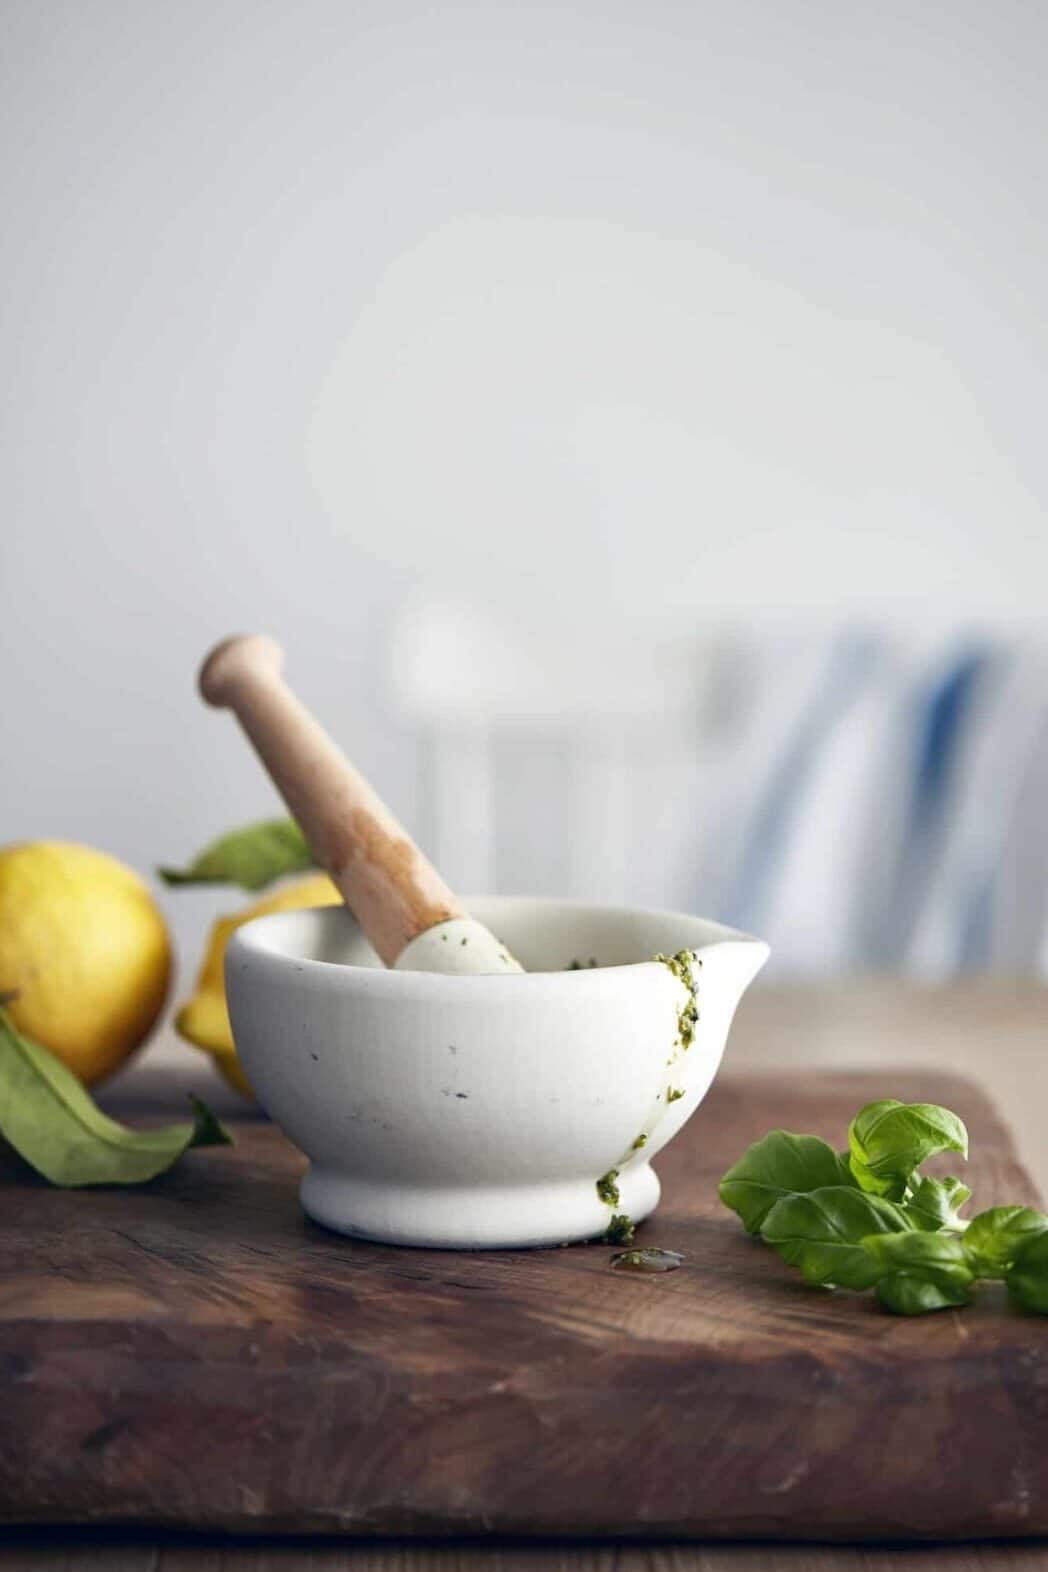 Pestle and mortar with pesto and basil on cutting board